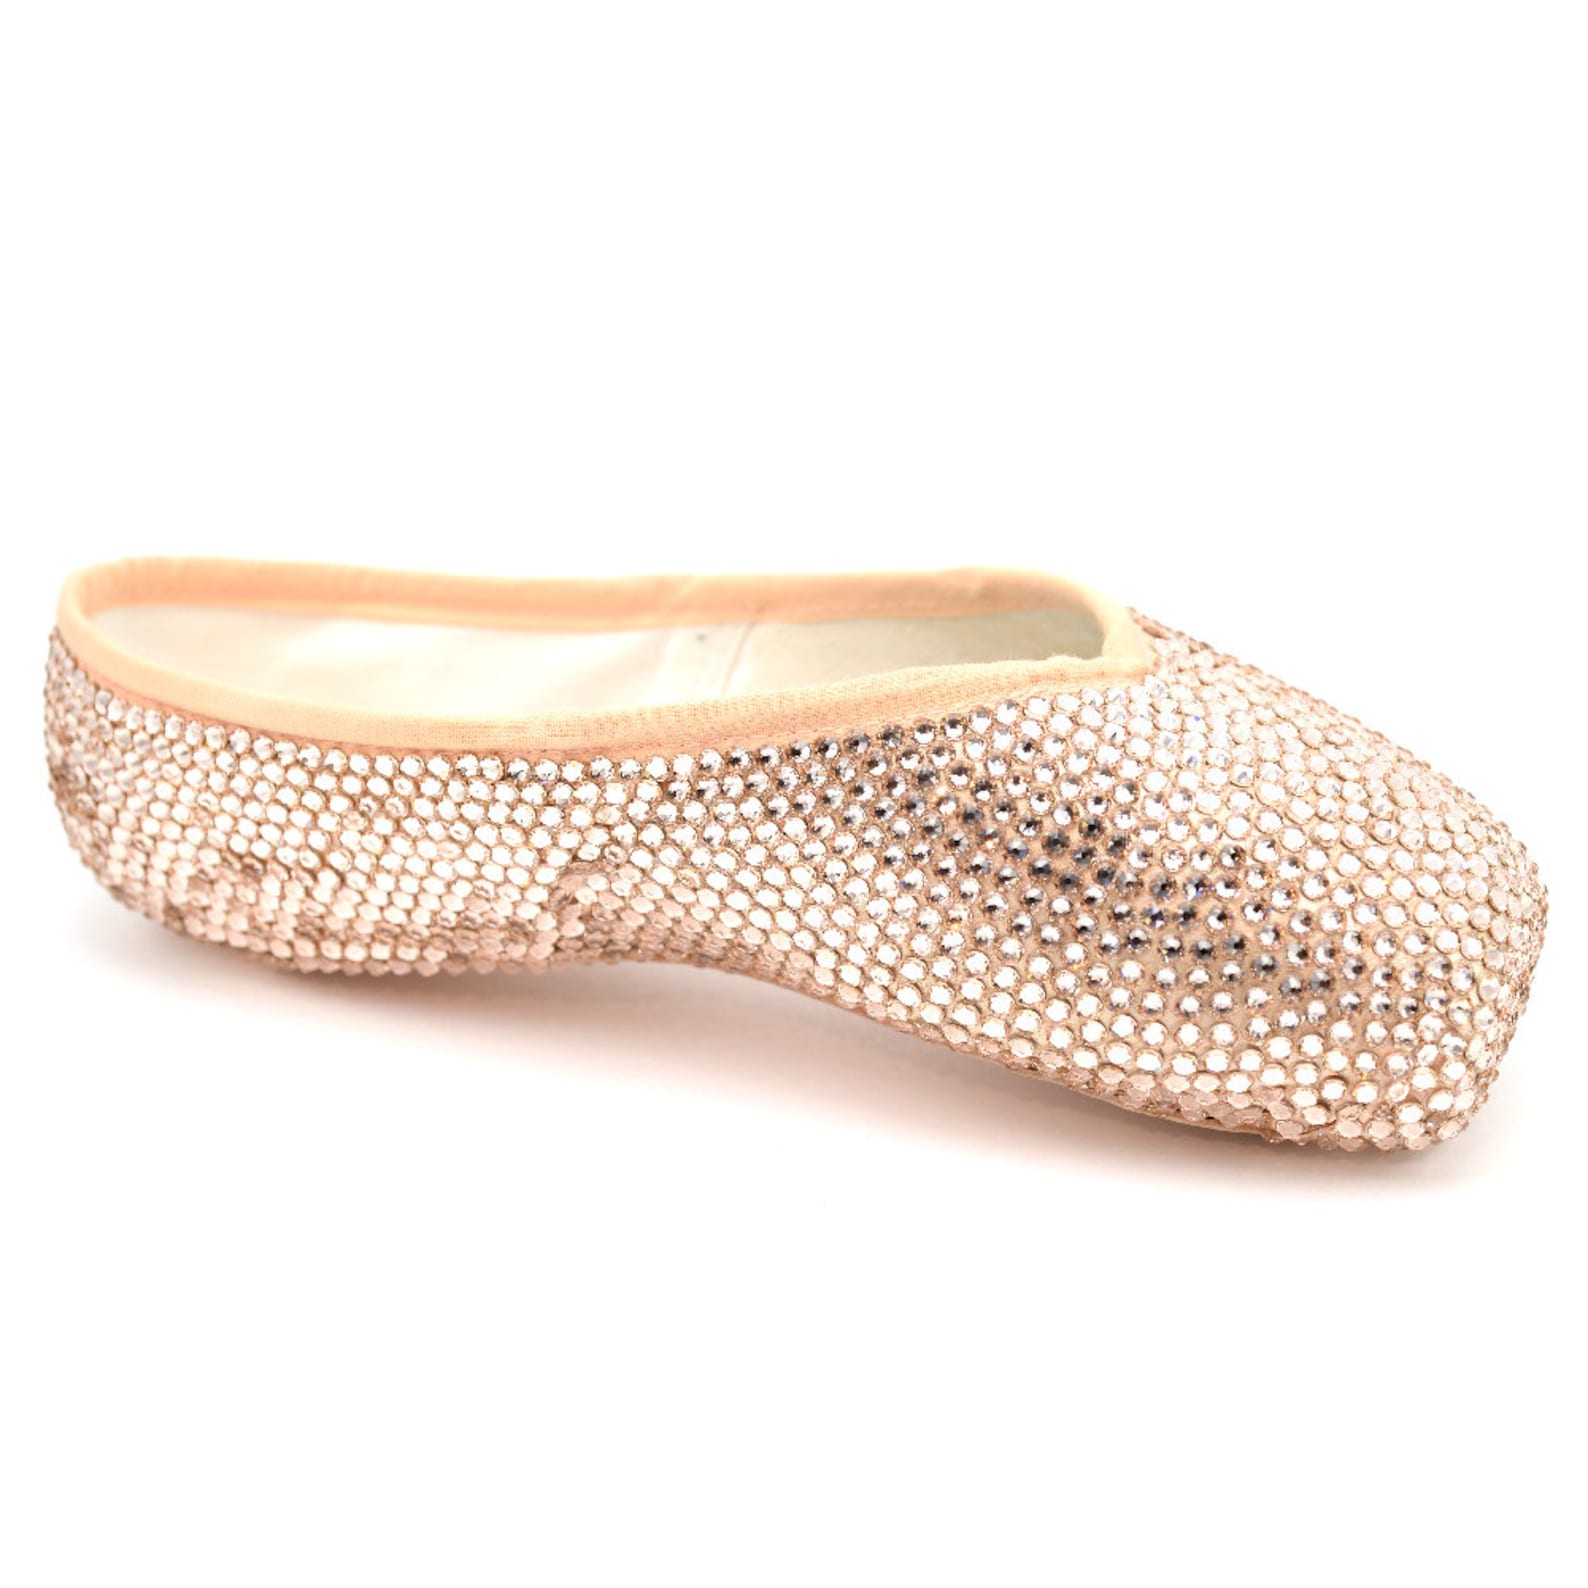 decorated pointe shoes | crystal ballet shoes | gift for dancer | 100% swarovski crystals | your pointe shoes decorated with cry